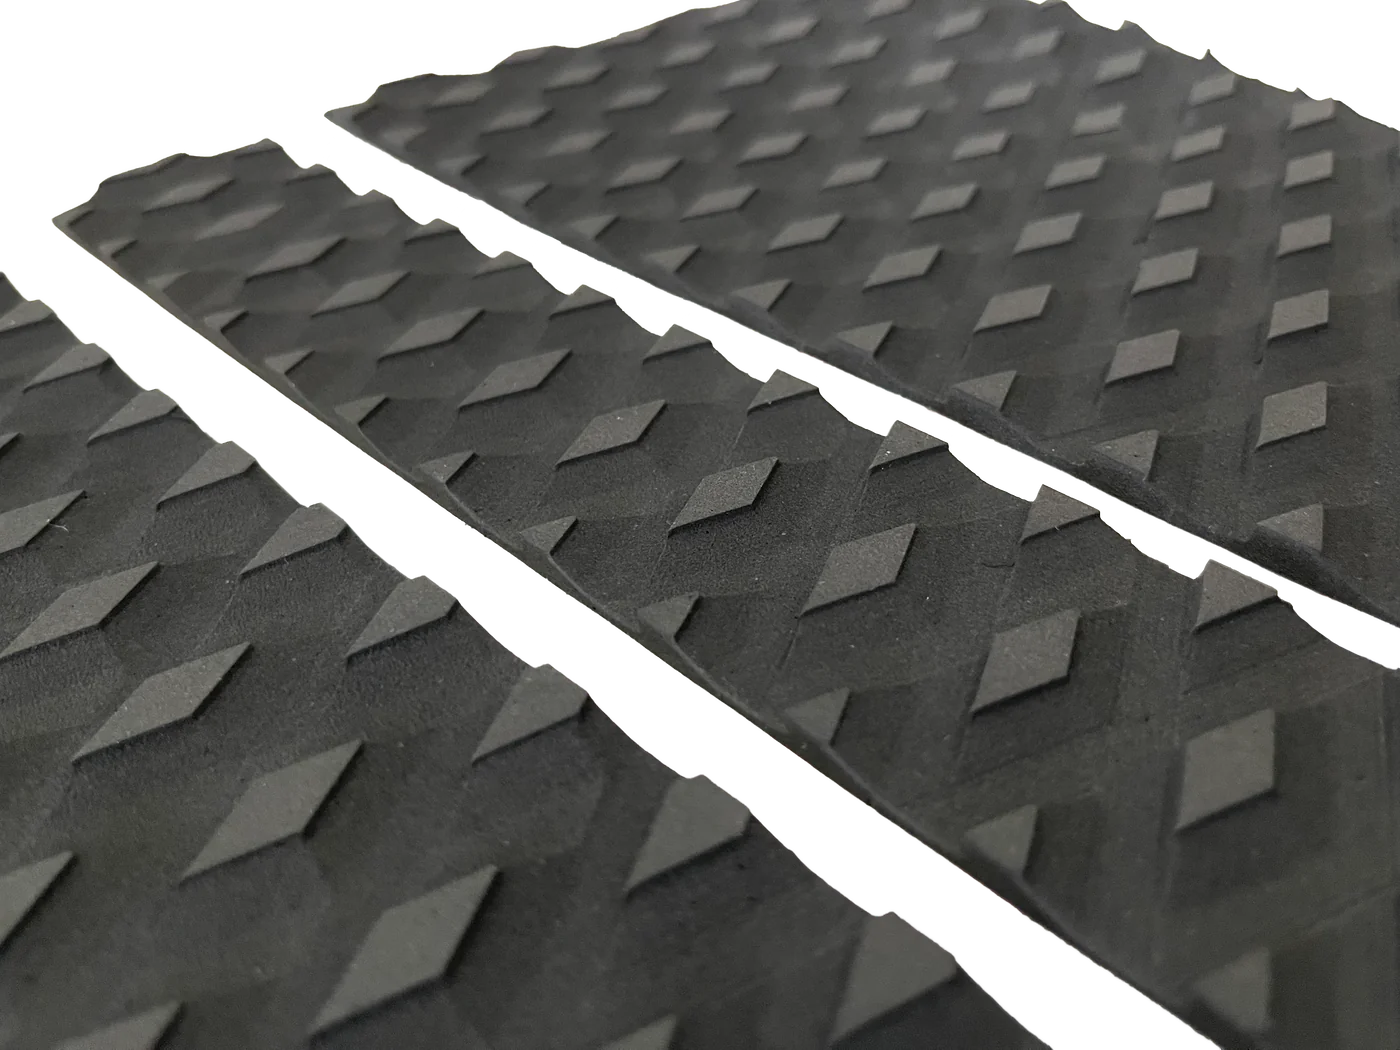 2+1 Flat Traction Pad